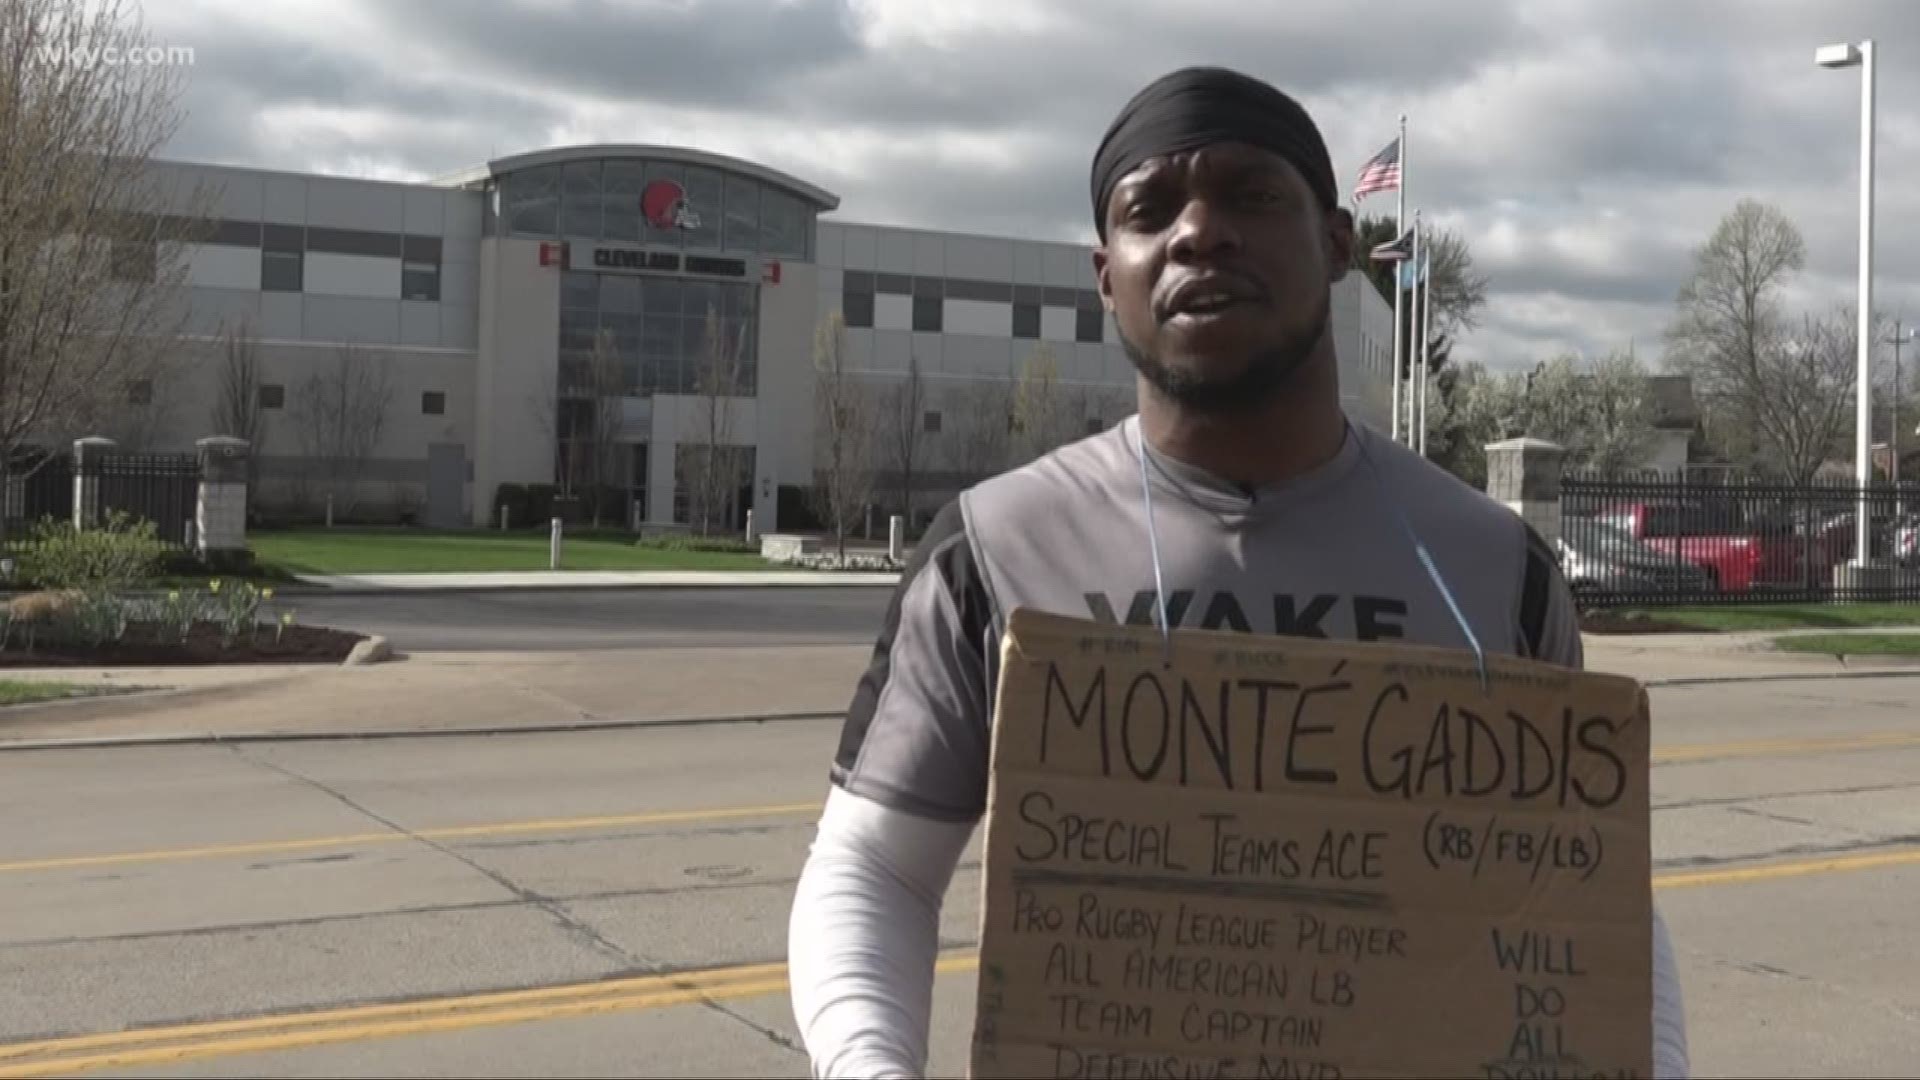 April 25, 2019: If you happen to be driving down Lou Groza Blvd. in Berea, you might notice something unusual. That would be former Towson linebacker and Cleveland native Monte Gaddis standing outside the Cleveland Browns' facility begging for a tryout with the team.